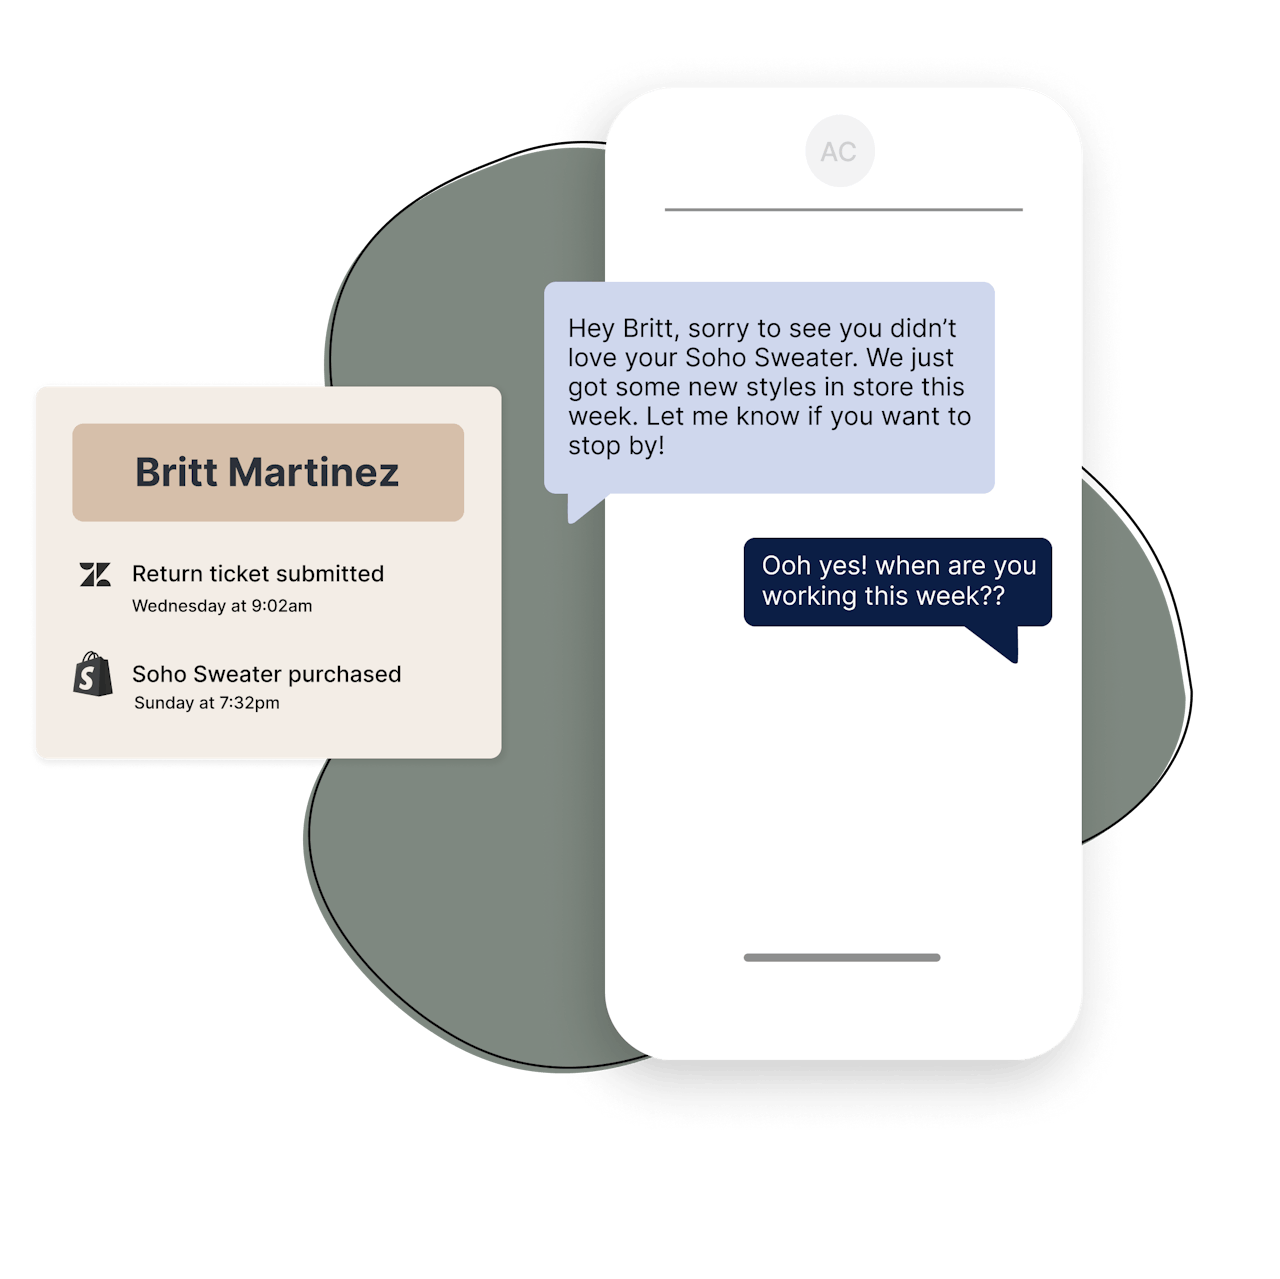 Using customer data to personalize messages with Endear